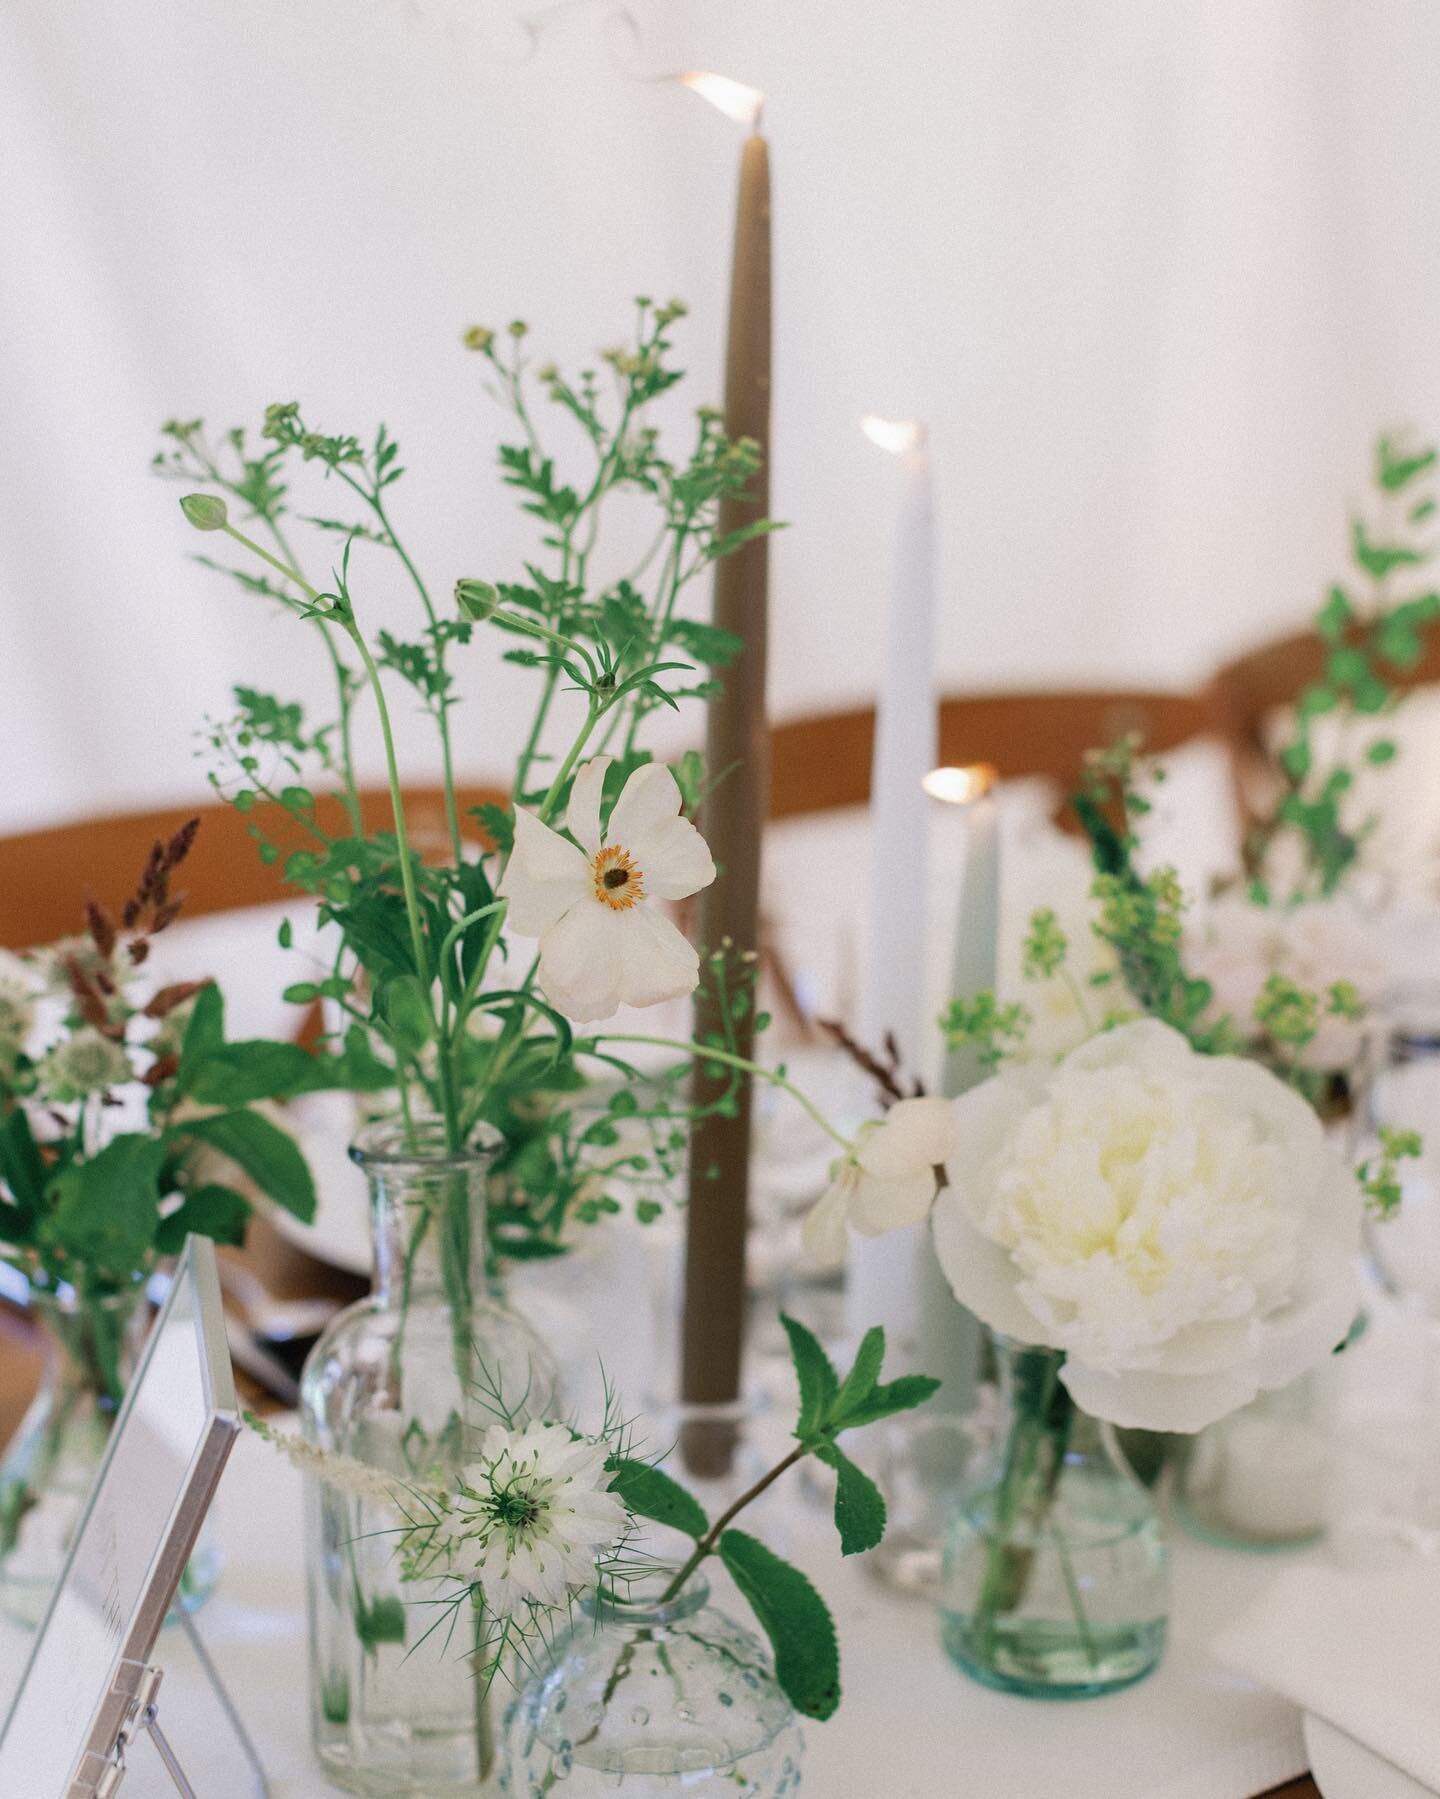 Budvases ~ A popular choice for long trestle tables. I love them as they can let the single stems sing and on mass they look great. Throw in some coloured taper candles and maybe some tealights and you have a very full table! 

#weddingflowers #brida